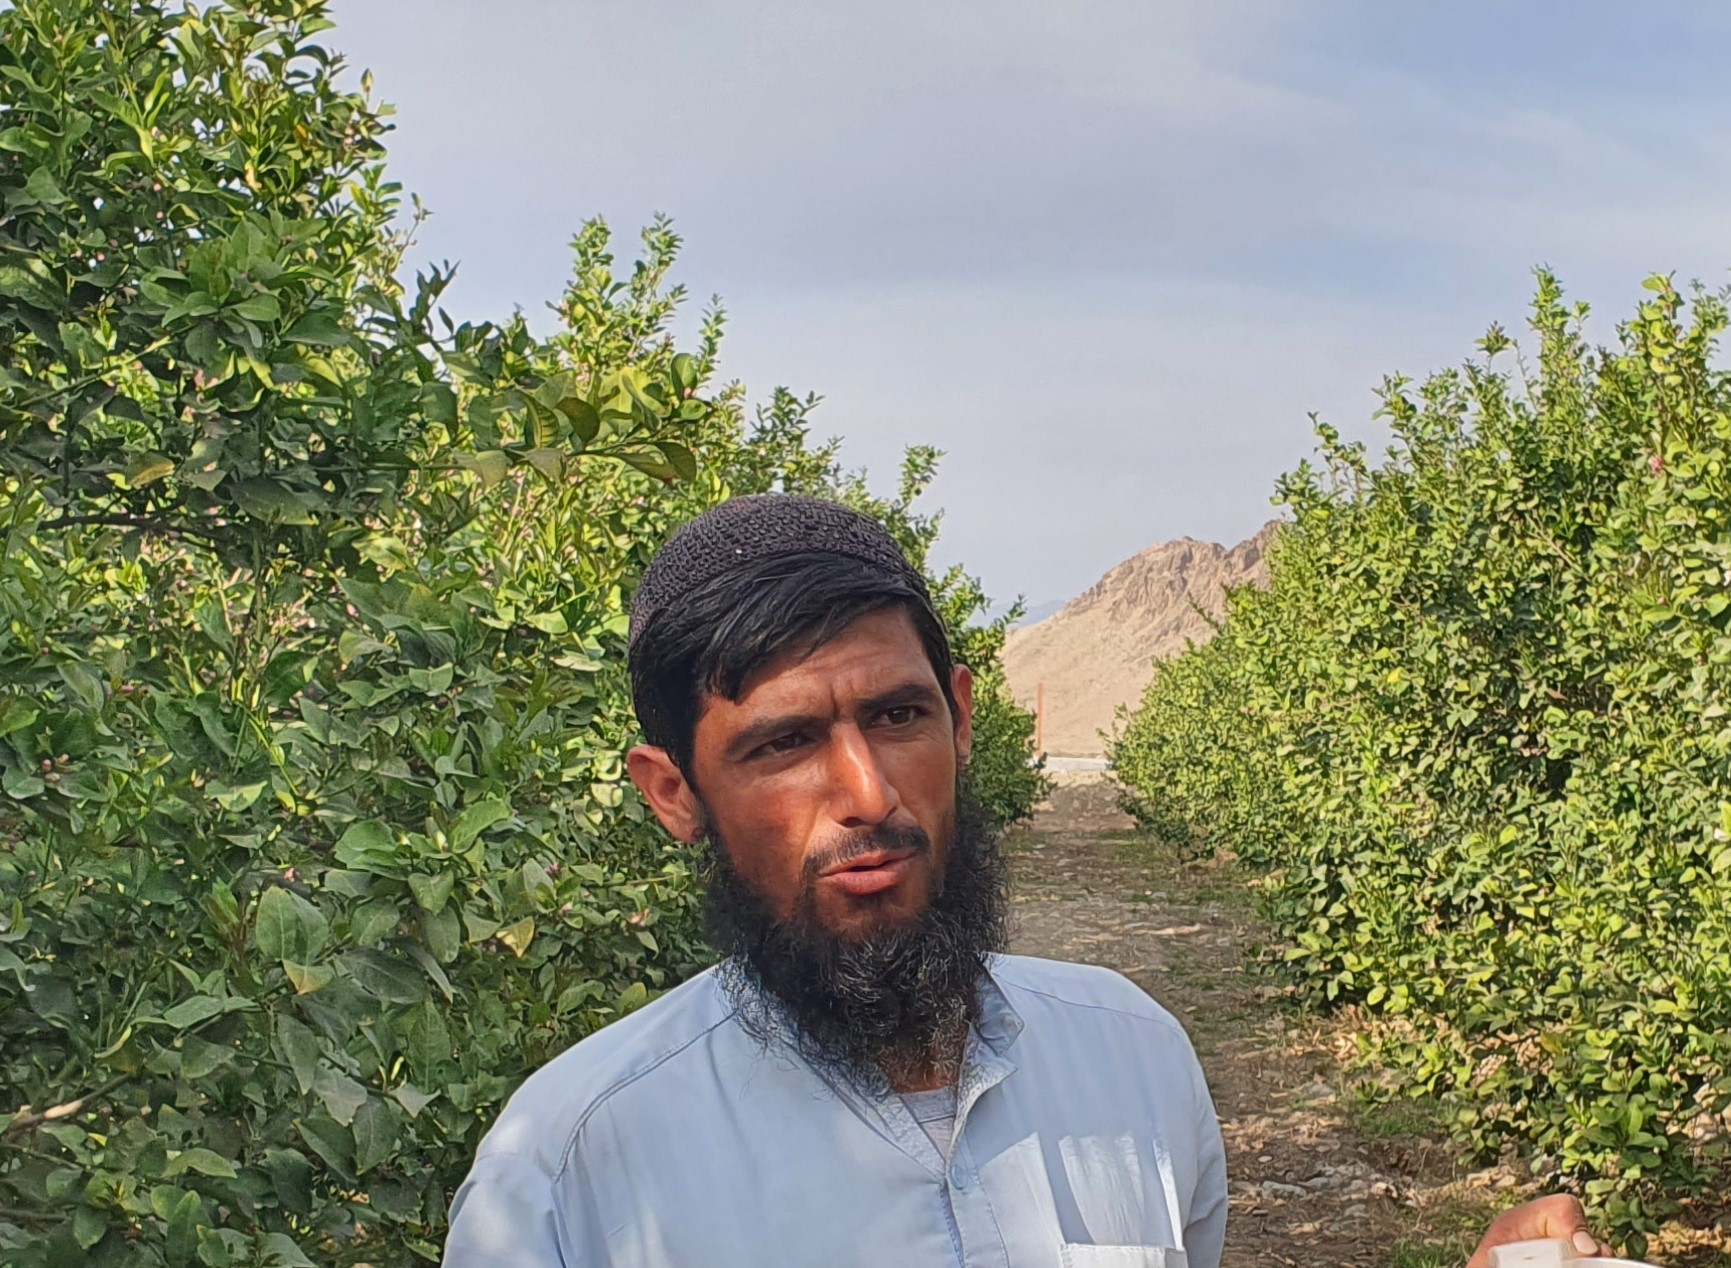 /coafg/uploads/res/16-04-2023_-drip-irrigation-system-increases-citrus-production-in-nangarhar_html/20230314_160038.jpg